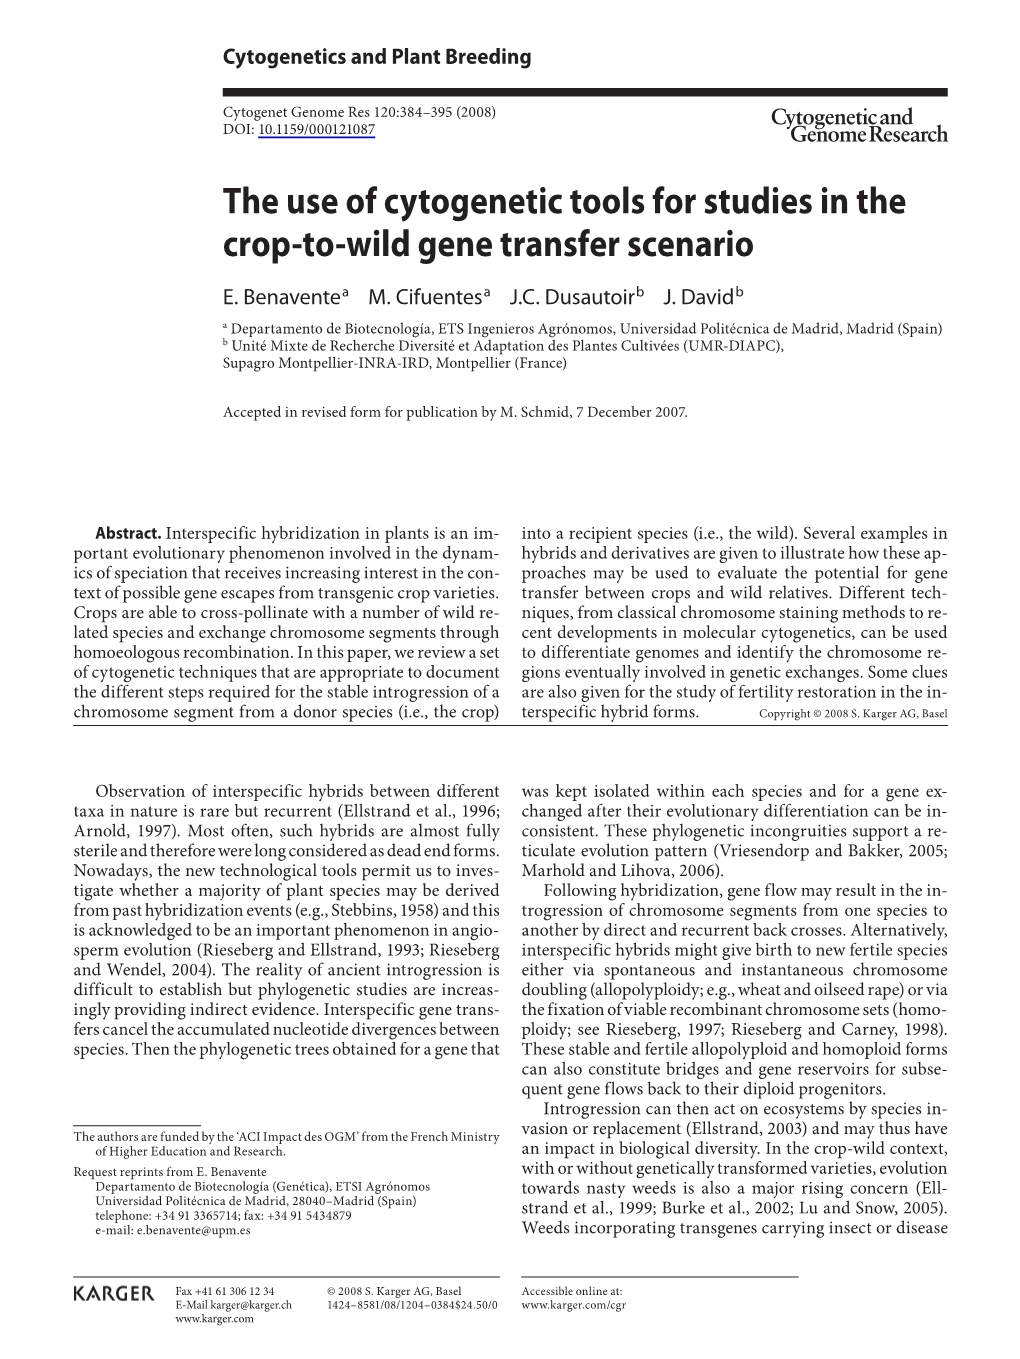 The Use of Cytogenetic Tools for Studies in the Crop-To-Wild Gene Transfer Scenario